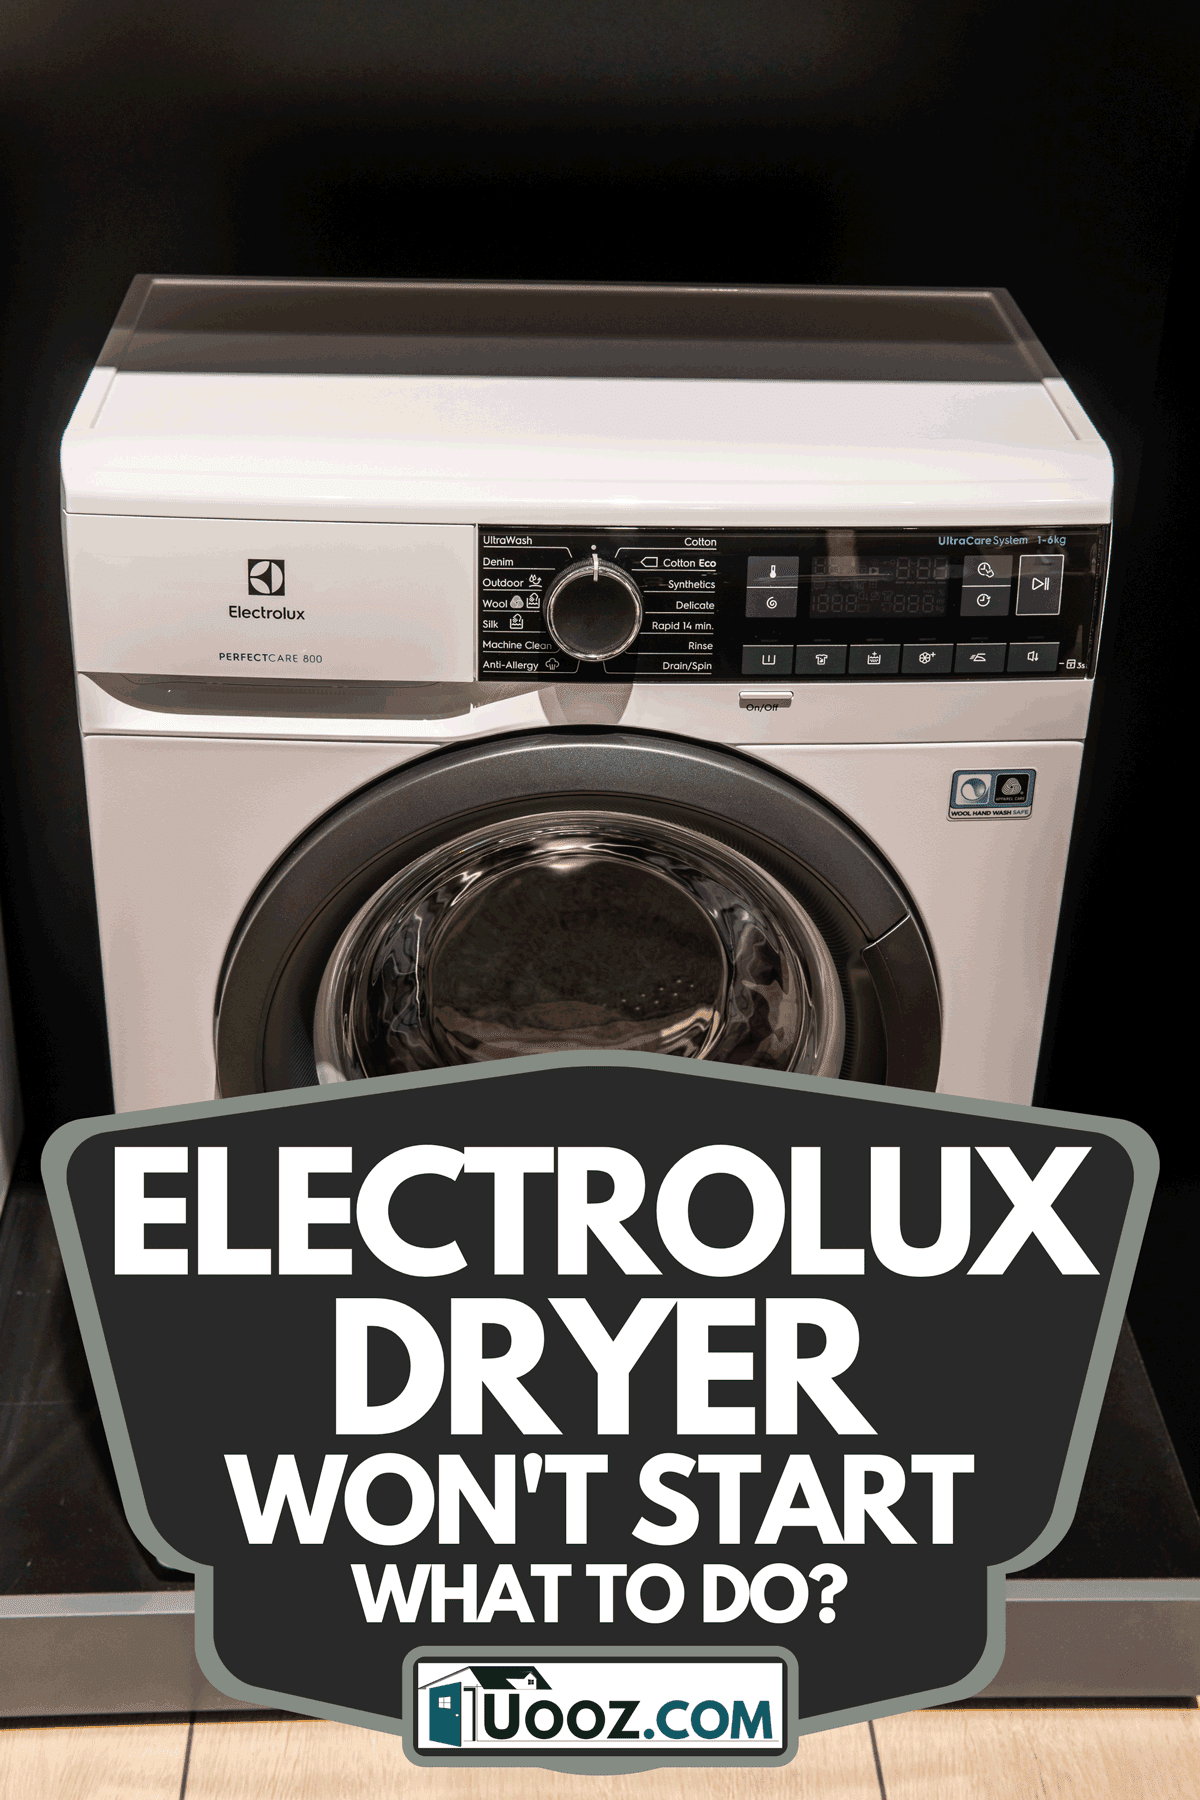 An Electrolux EcoCare dryer washing machine on display, Electrolux Dryer Won't Start—What To Do?